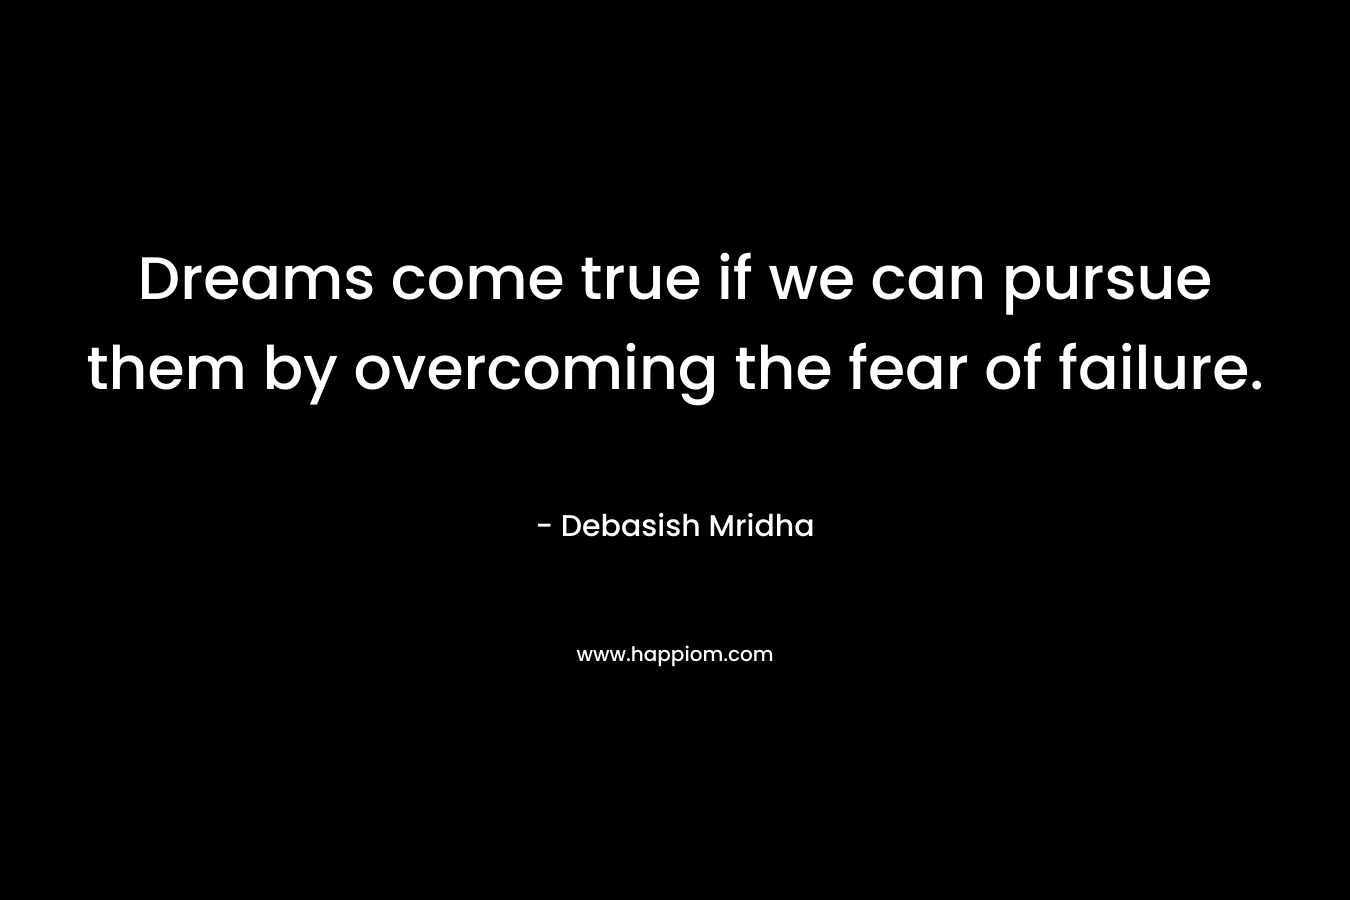 Dreams come true if we can pursue them by overcoming the fear of failure.